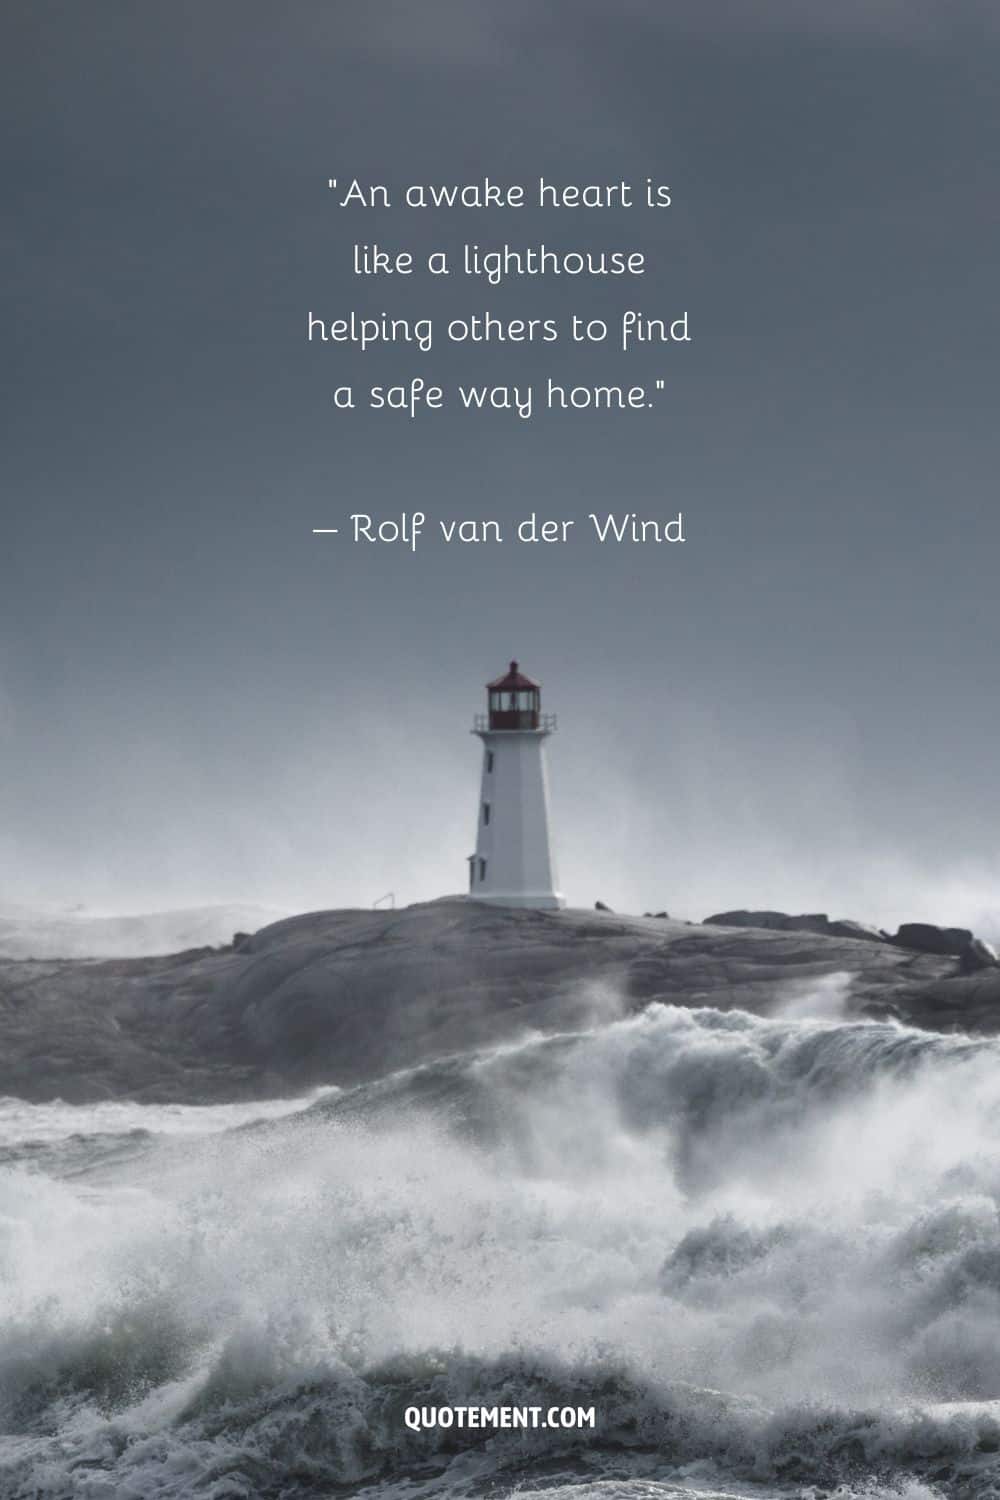 Fascinating quote by Rolf van der Wind and a lighthouse in the background